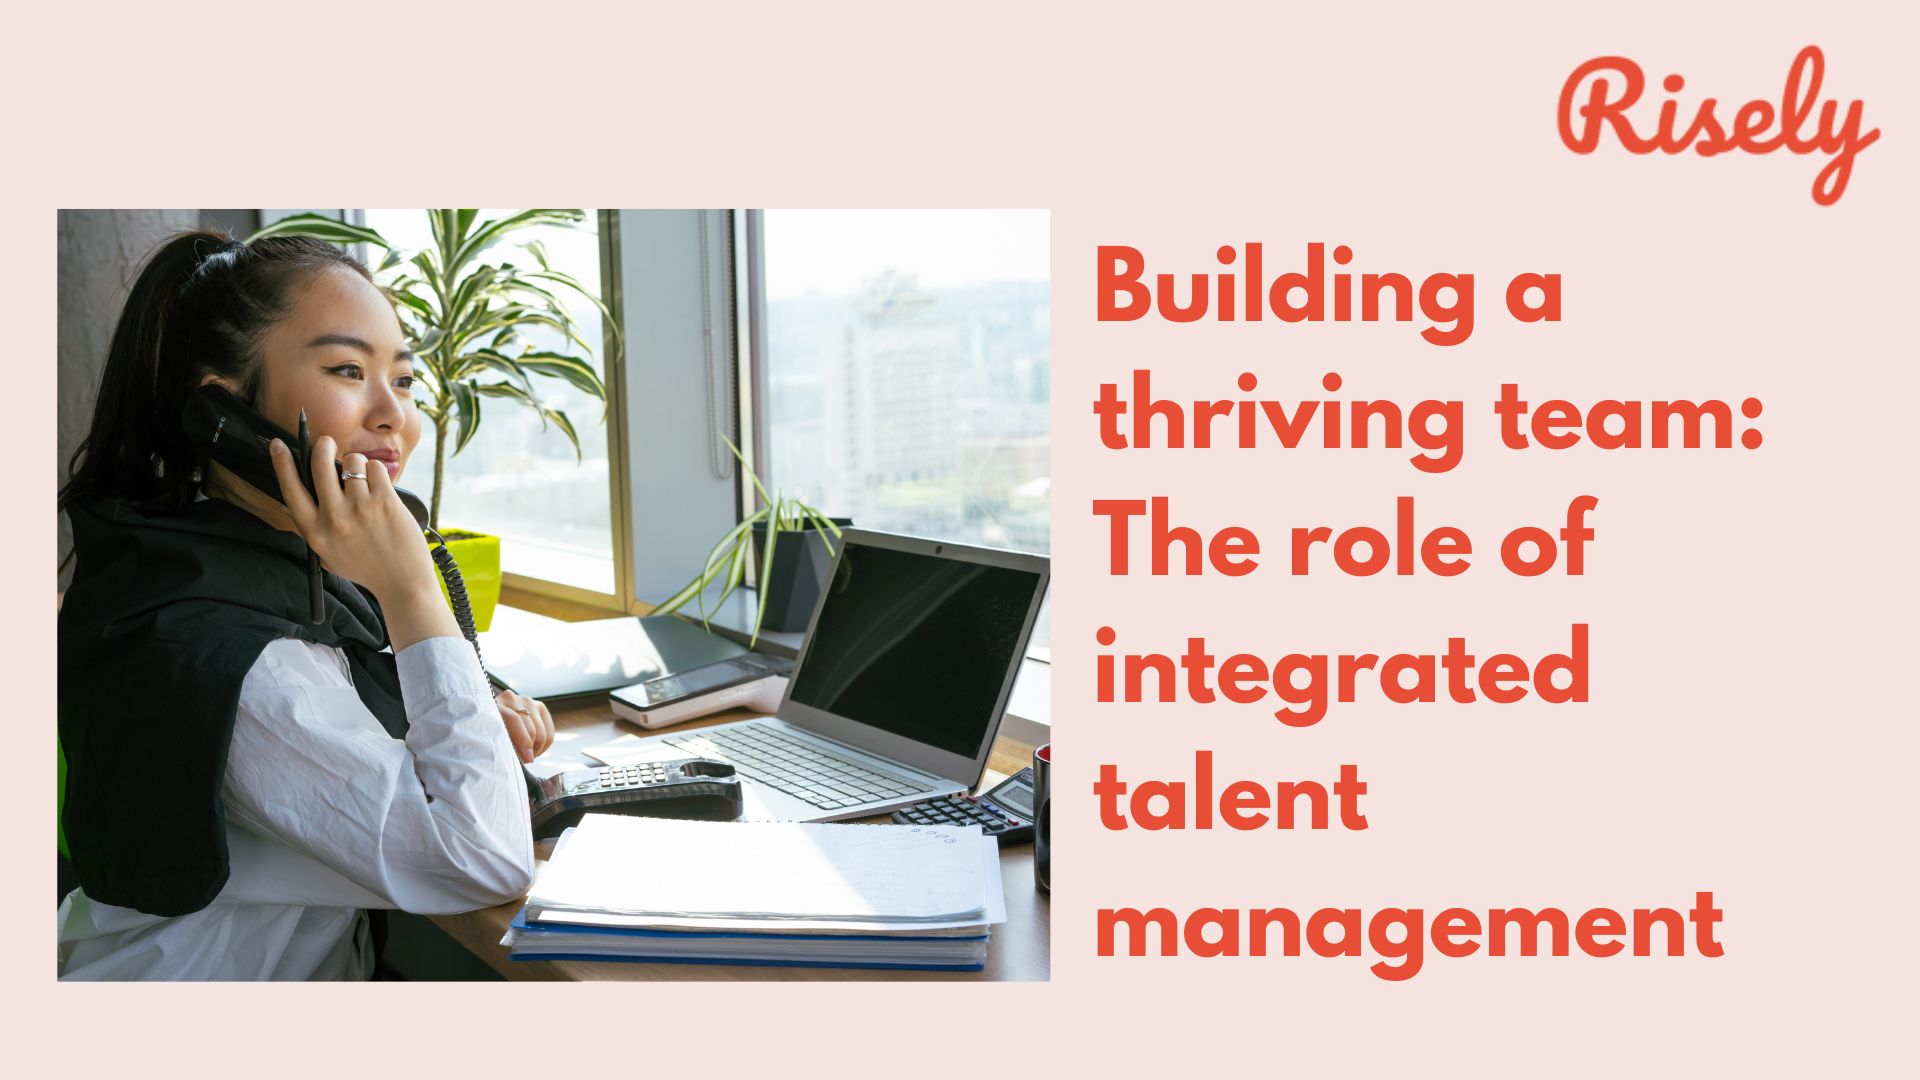 Building a thriving team: The role of integrated talent management